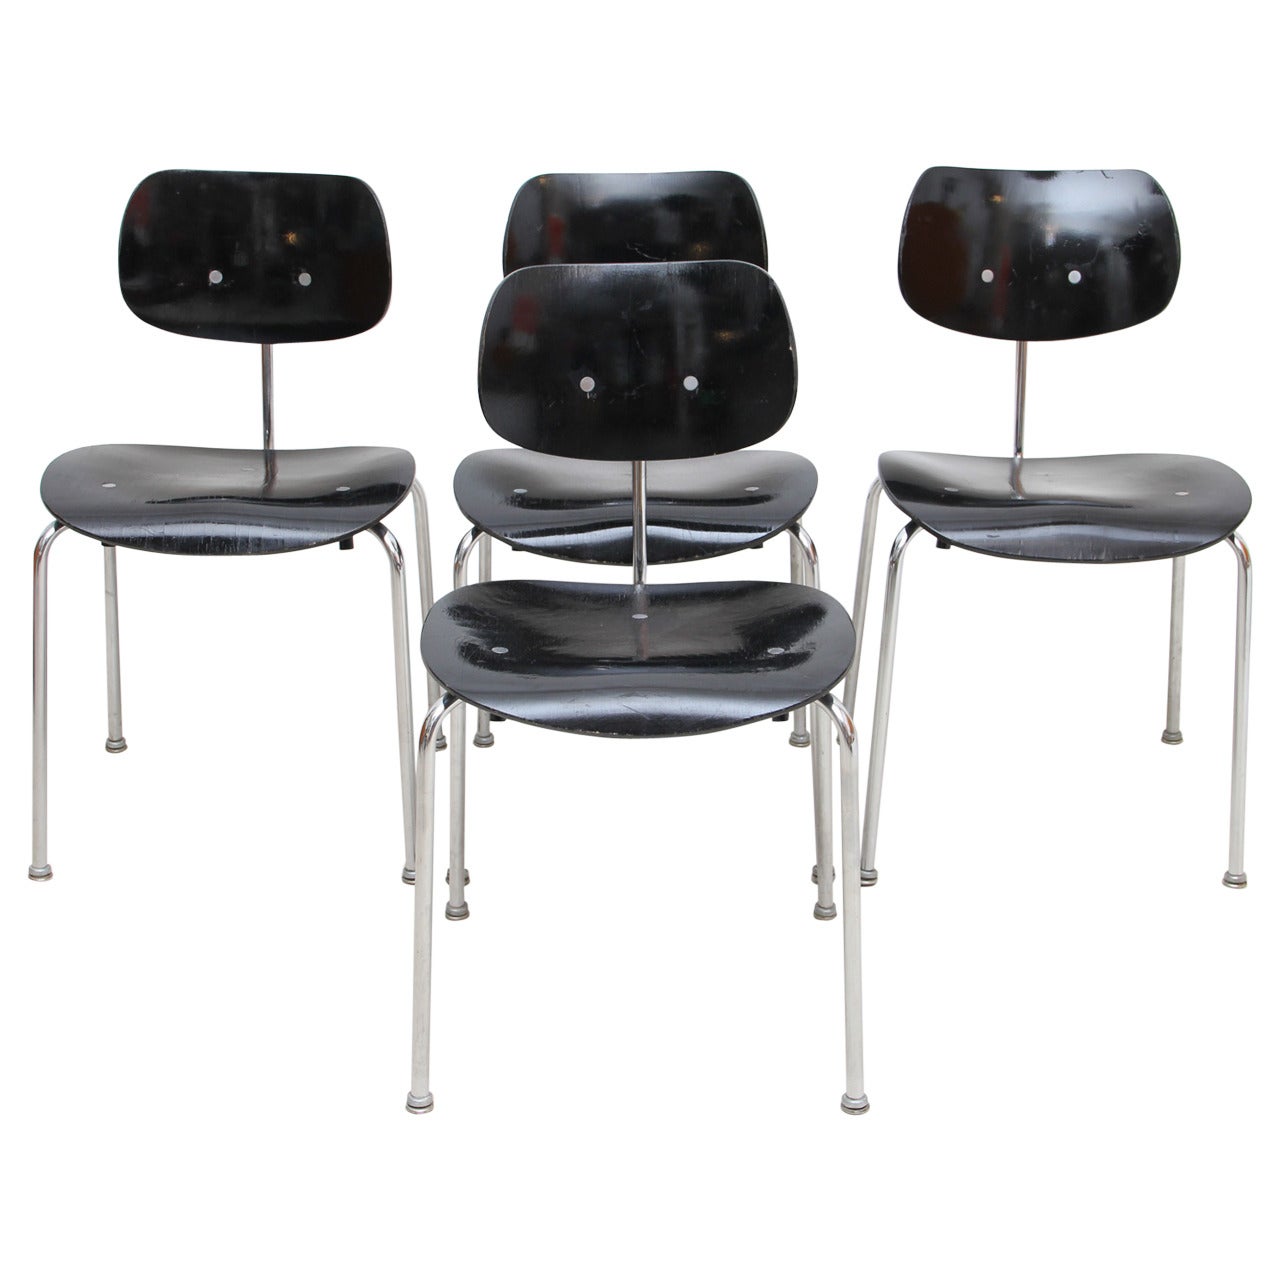 Set of Four SE 68 Chairs by Egon Eiermann Produced by Wilde & Spieth, 1950s